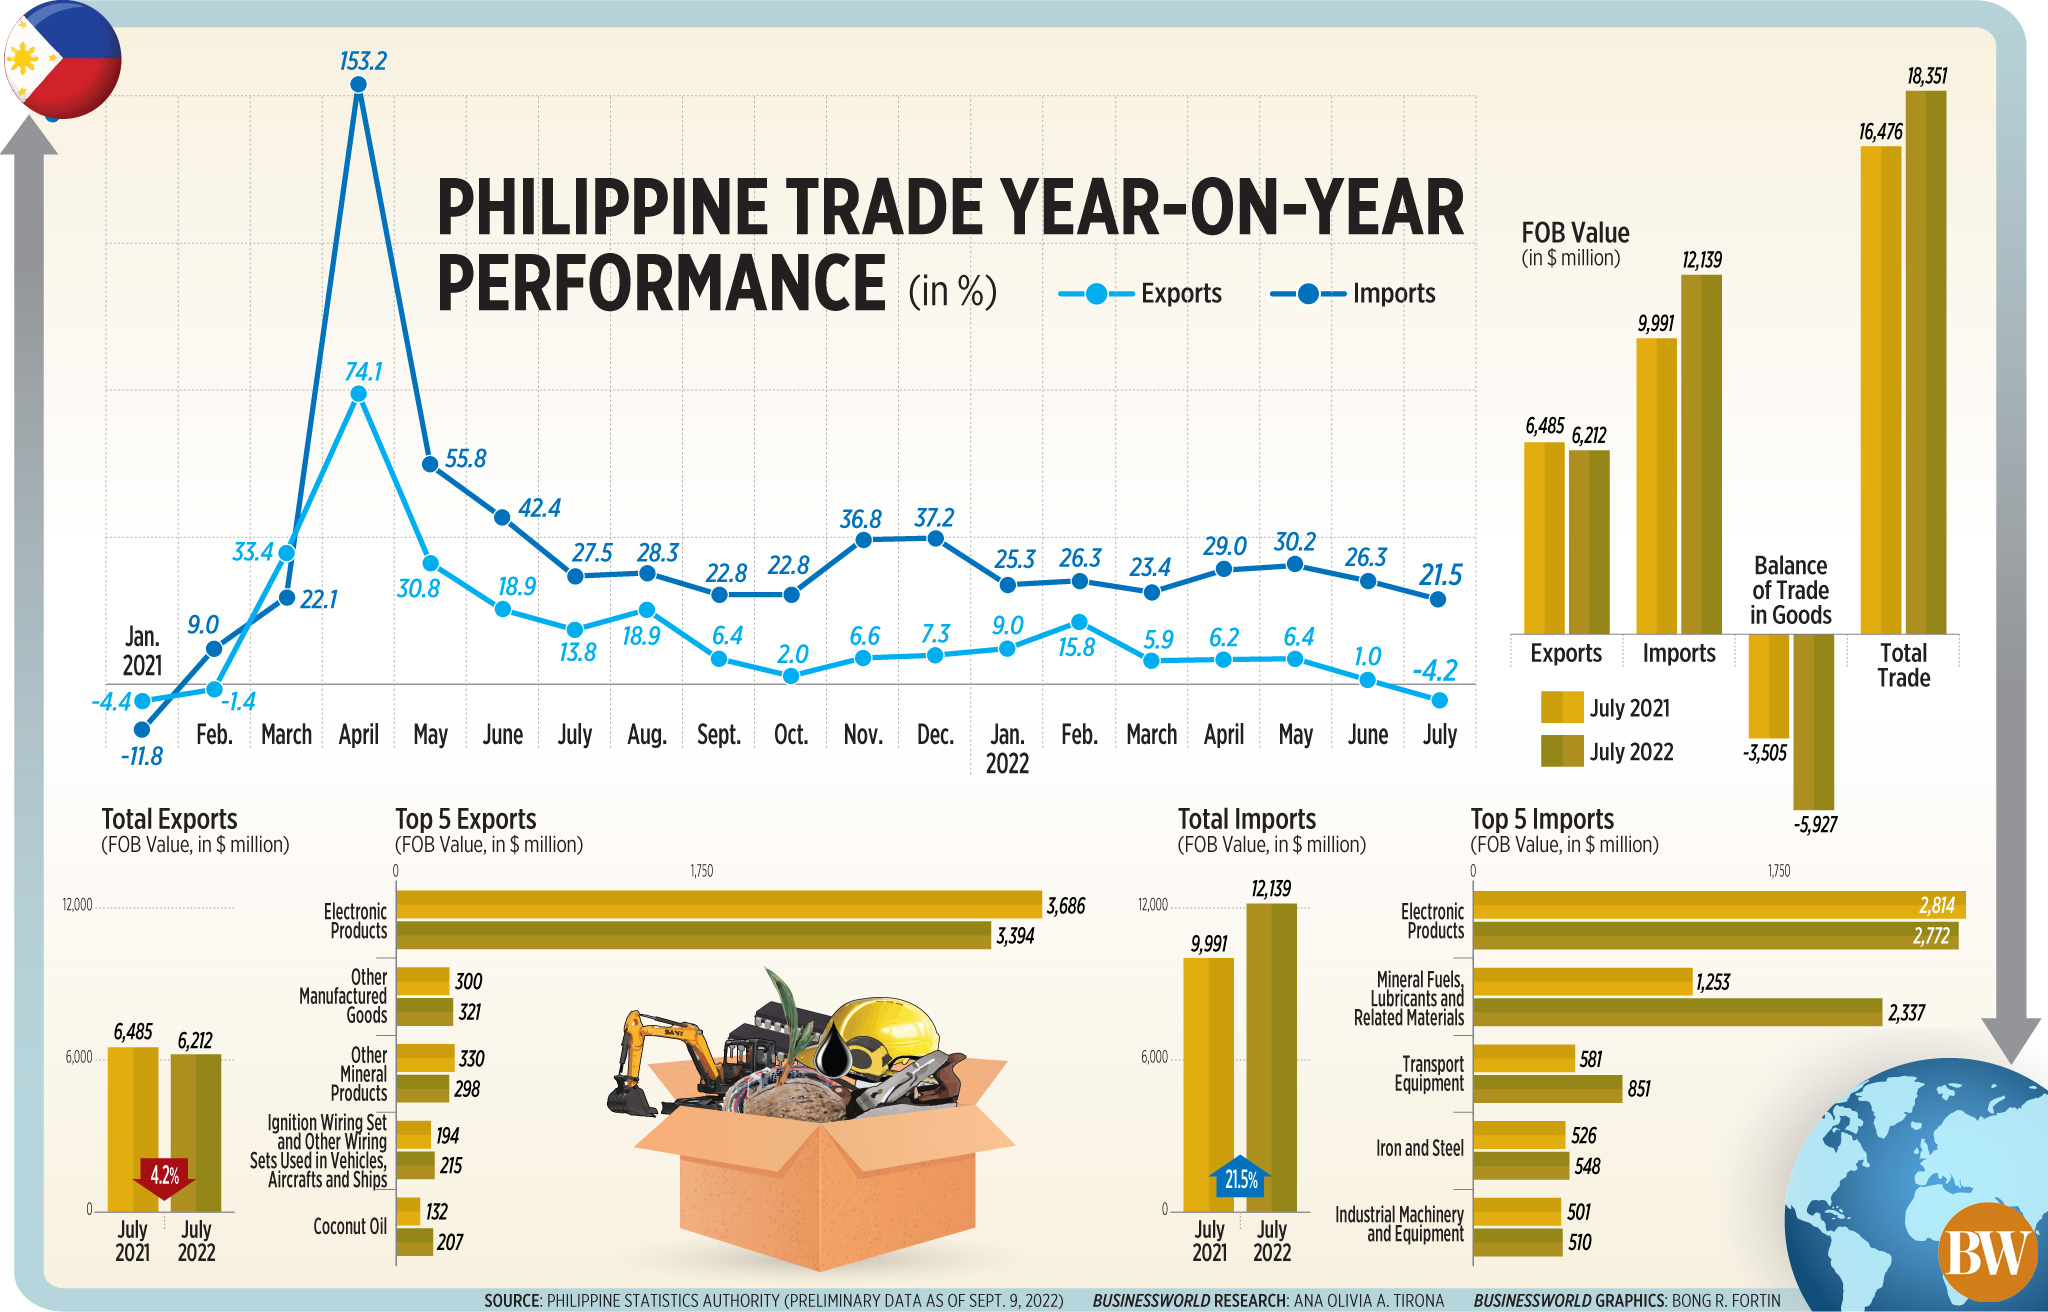 Philippine trade year-on-year performance